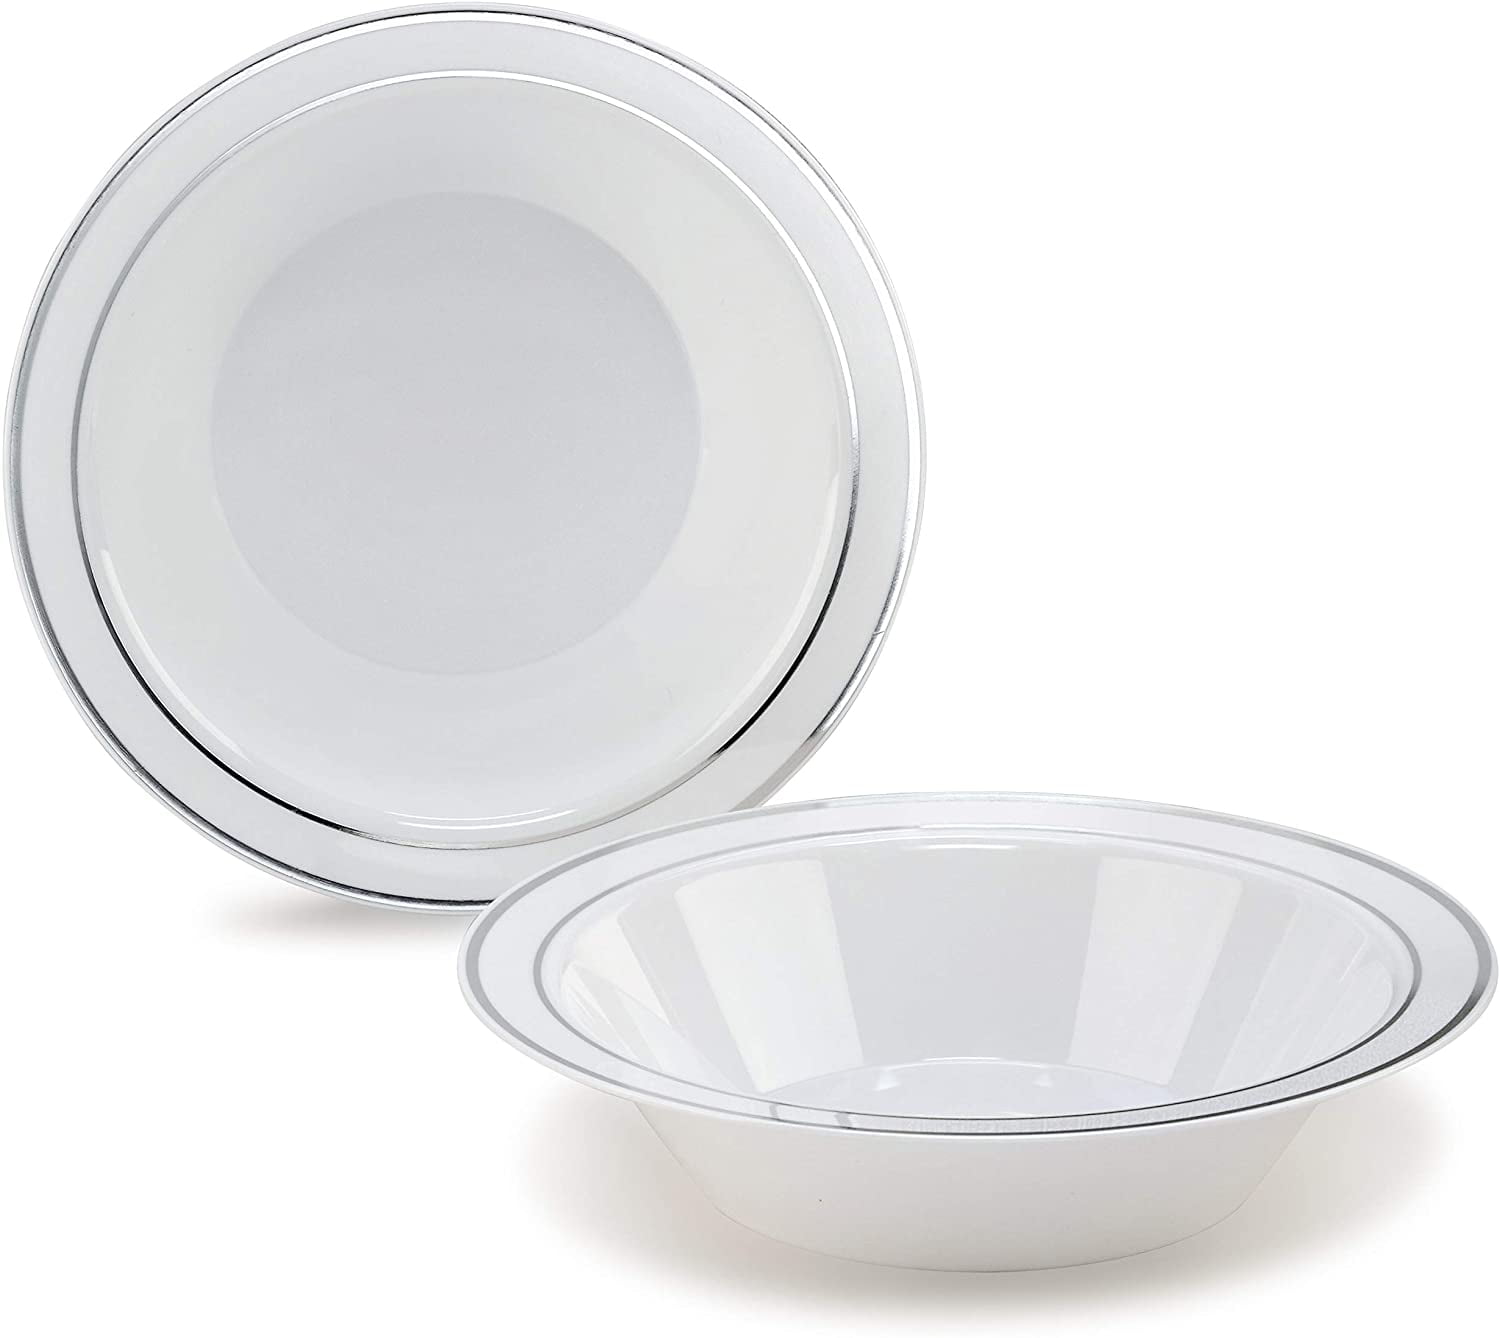 Clear Disposable Square Plates & Bowls Look Real "Wedding Special" 120ct 